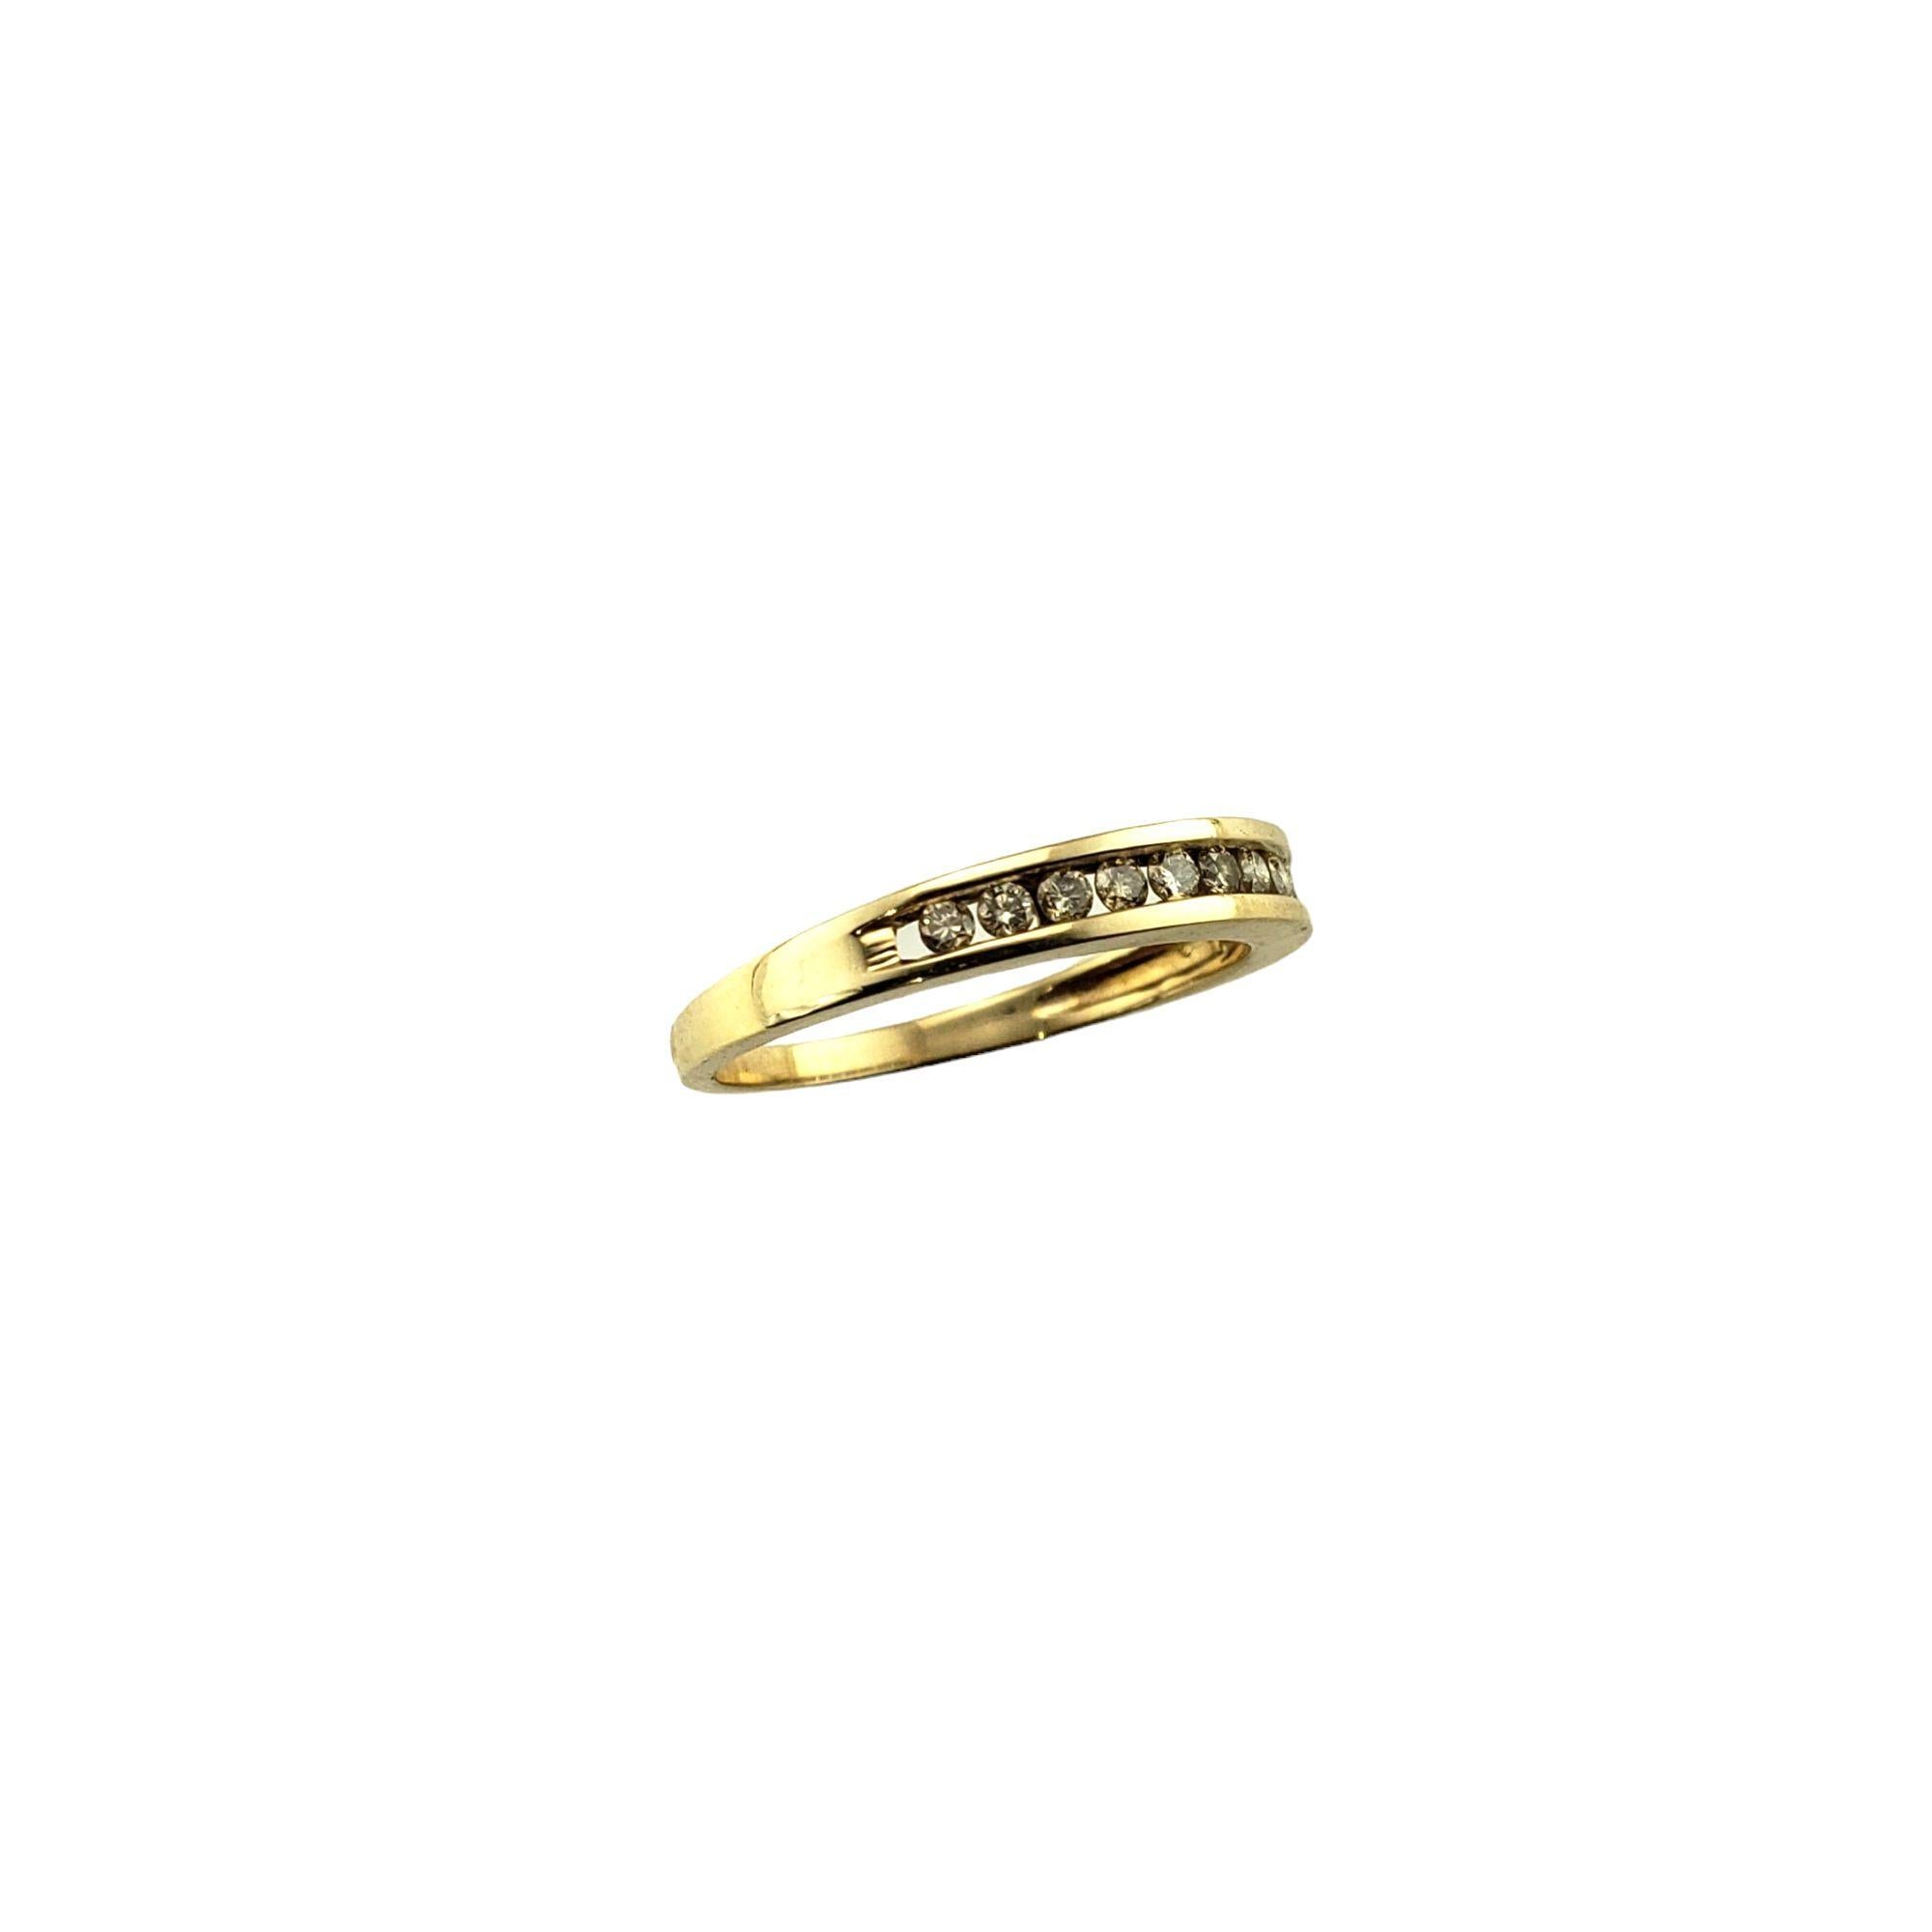 Round Cut 14 Karat Yellow Gold and Diamond Wedding Band Ring Size 6.75 For Sale